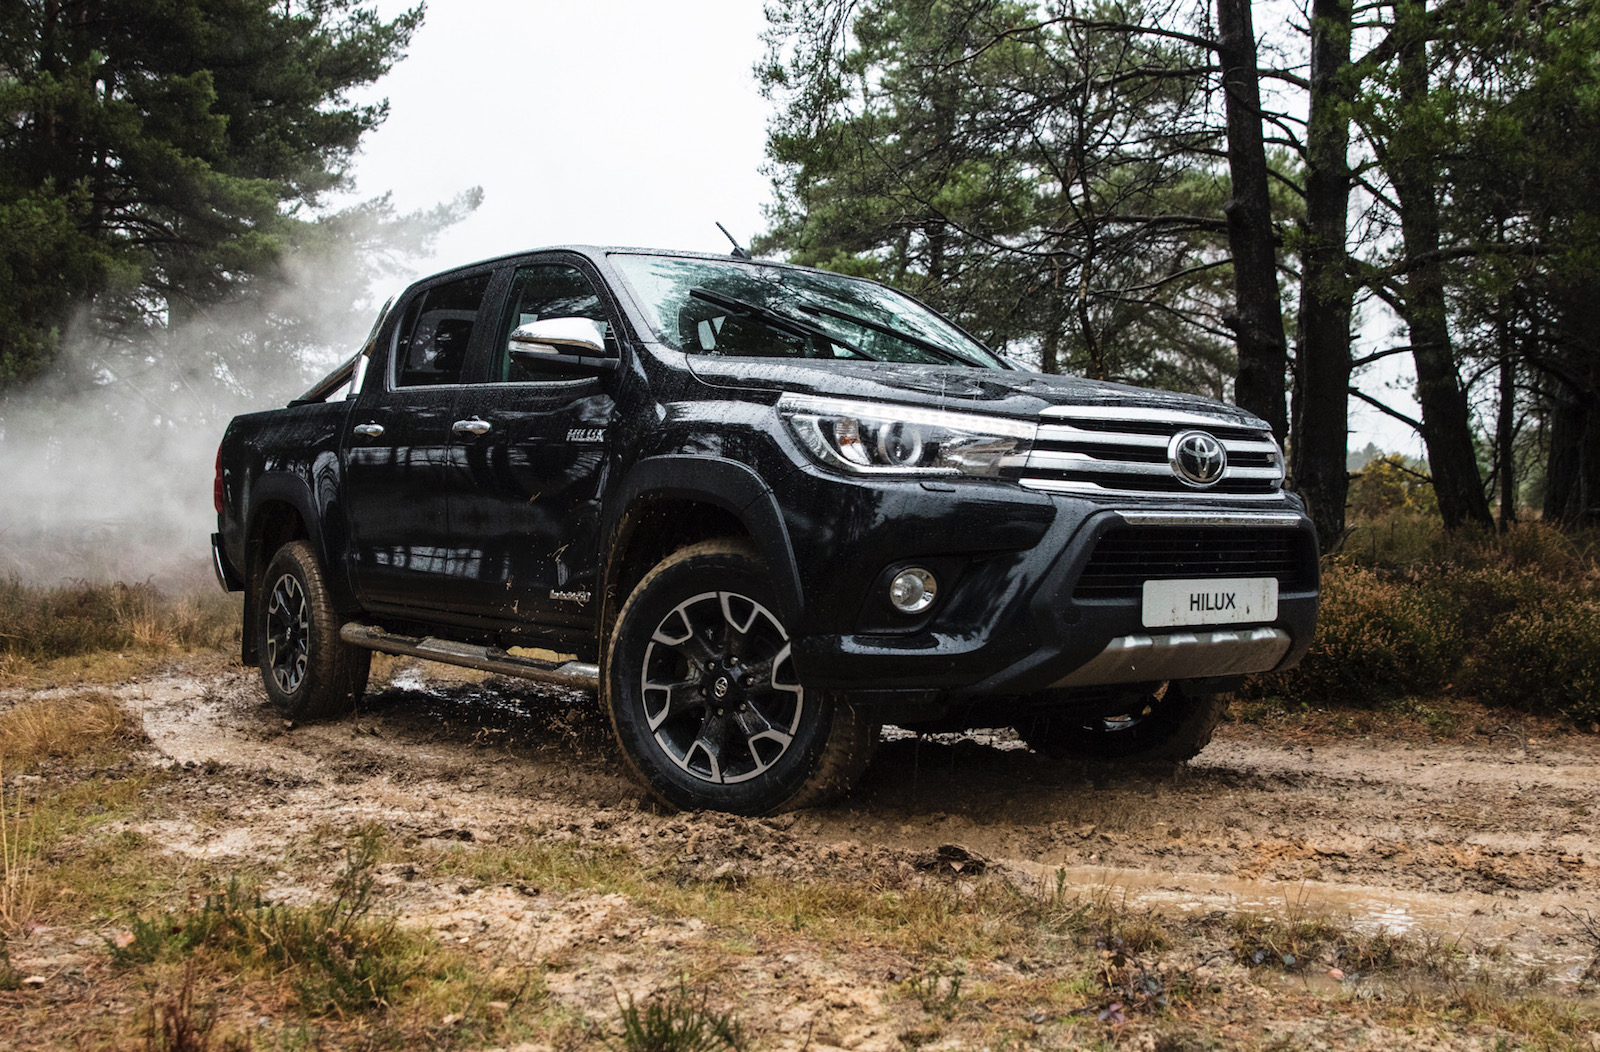 Toyota HiLux celebrates 50th anniversary with Chrome Edition